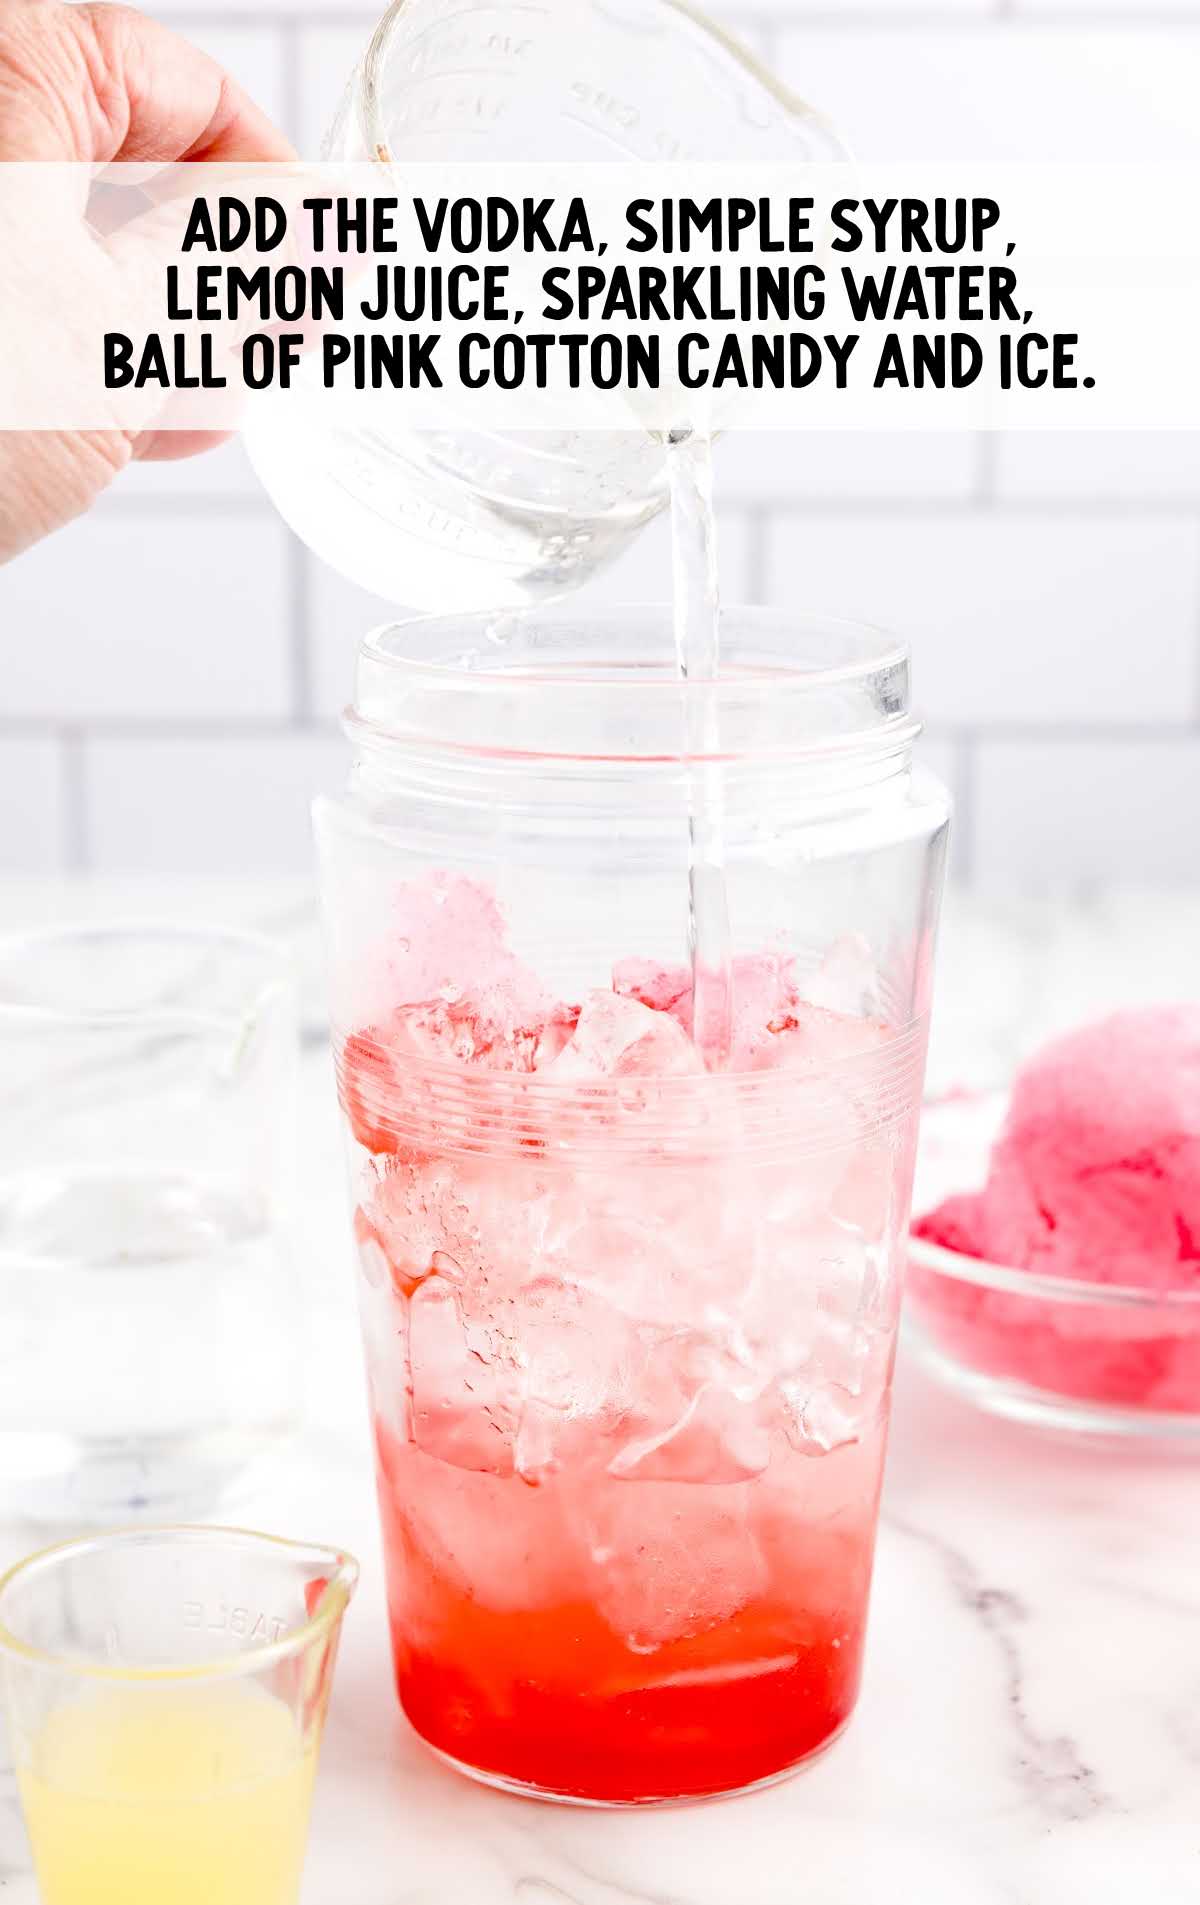 vodka, simple syrup, lemon juice, sparkling water, ice and pink cotton candy added to a shaker